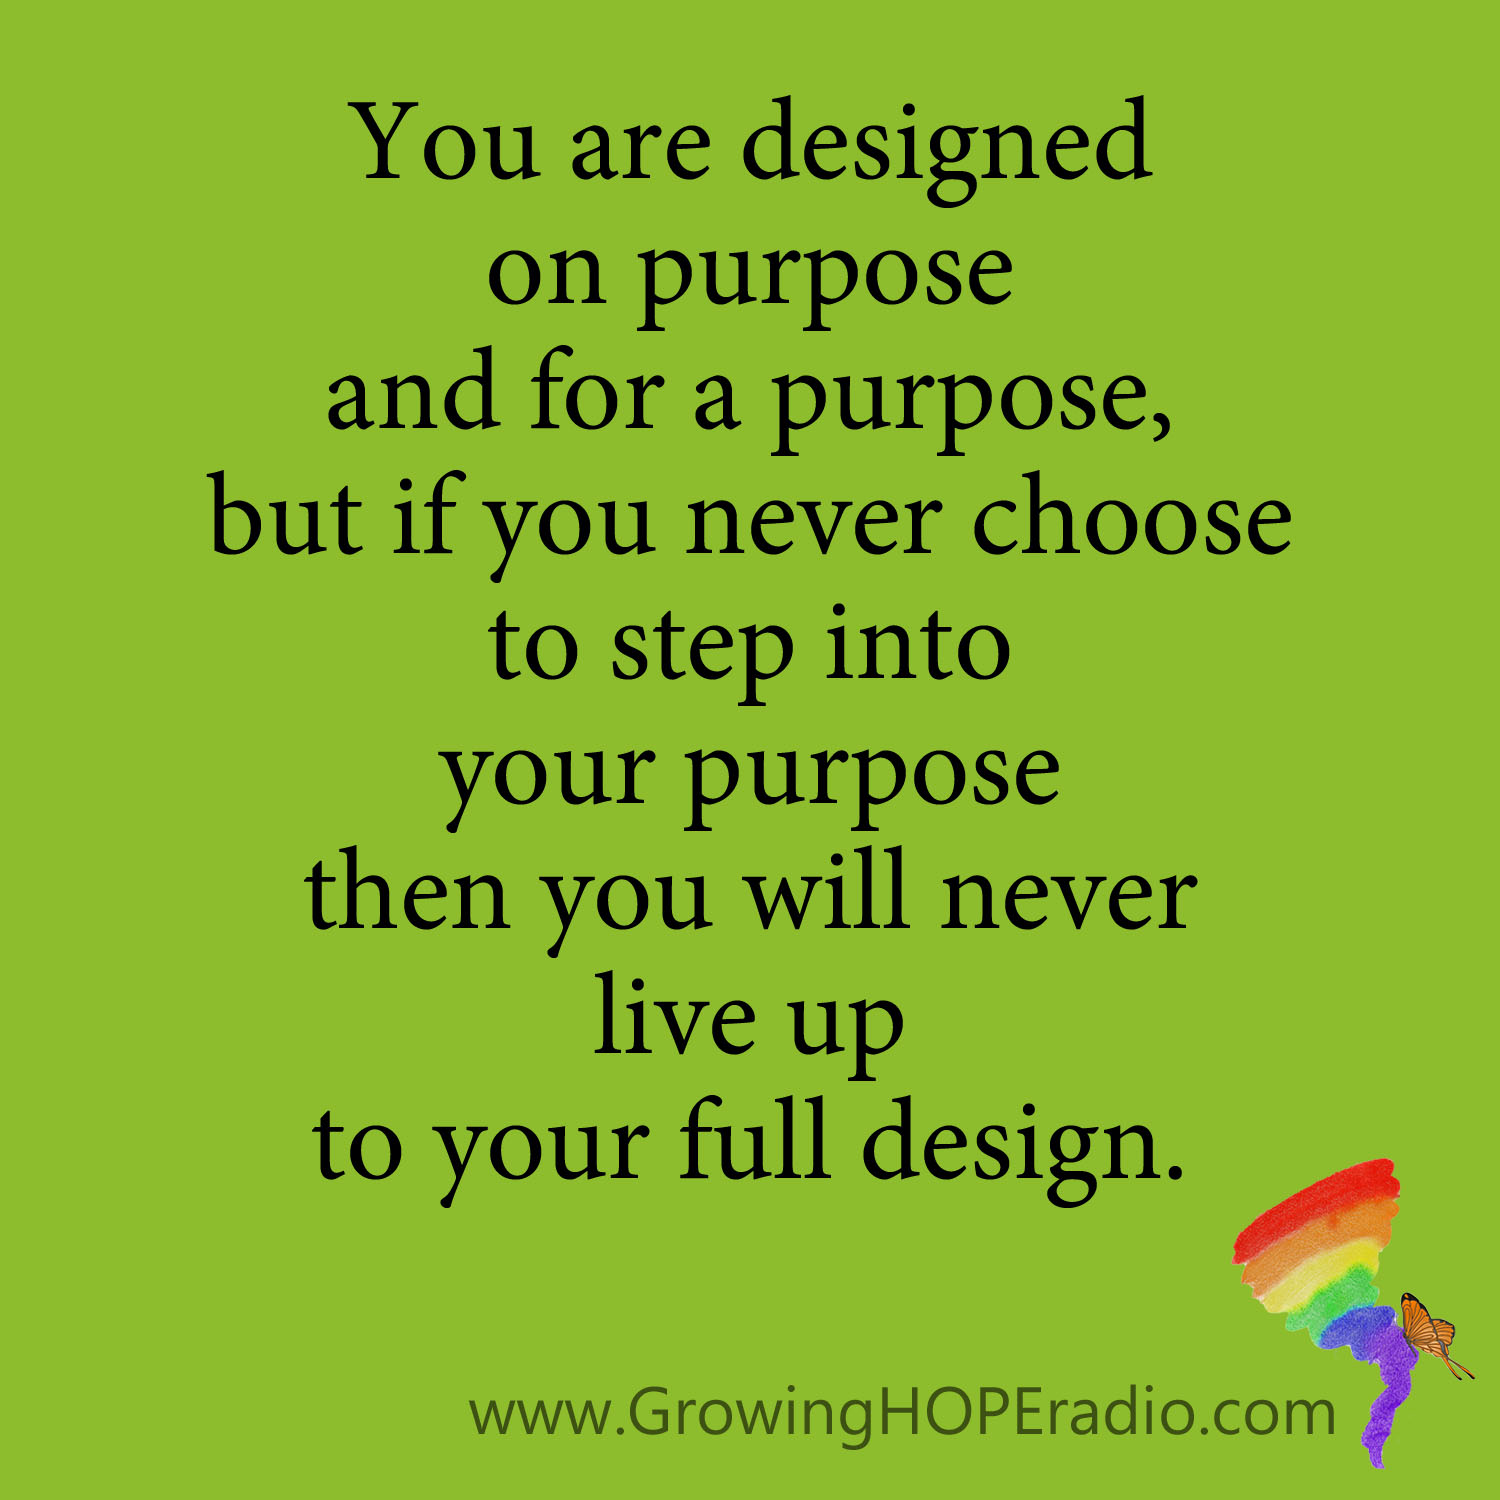 Growing HOPE Daily - Quote - your full design